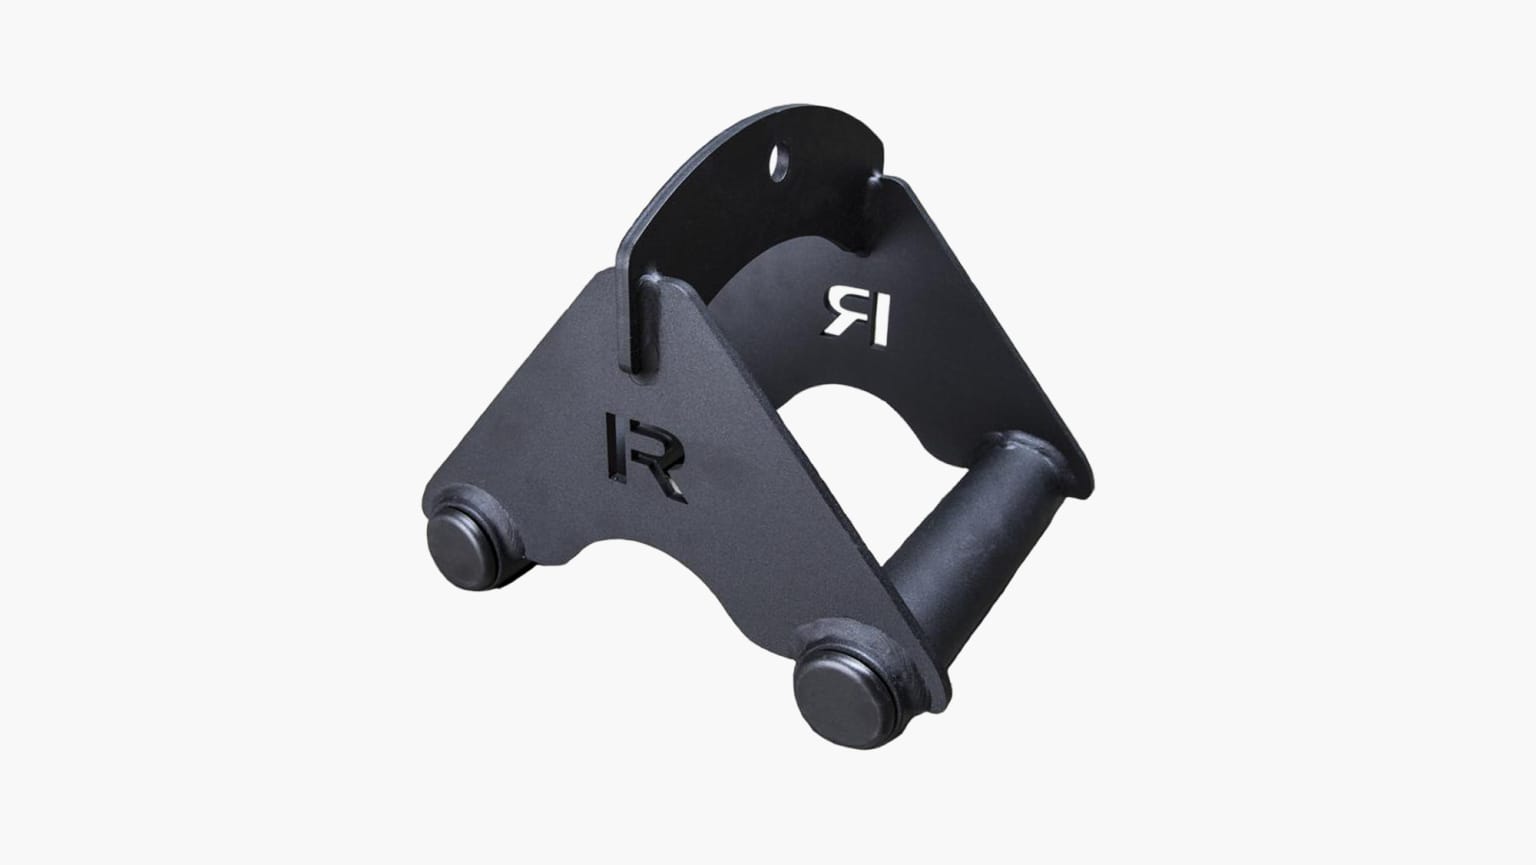 Anyone use an adjustable weight gripper like this? : r/GripTraining